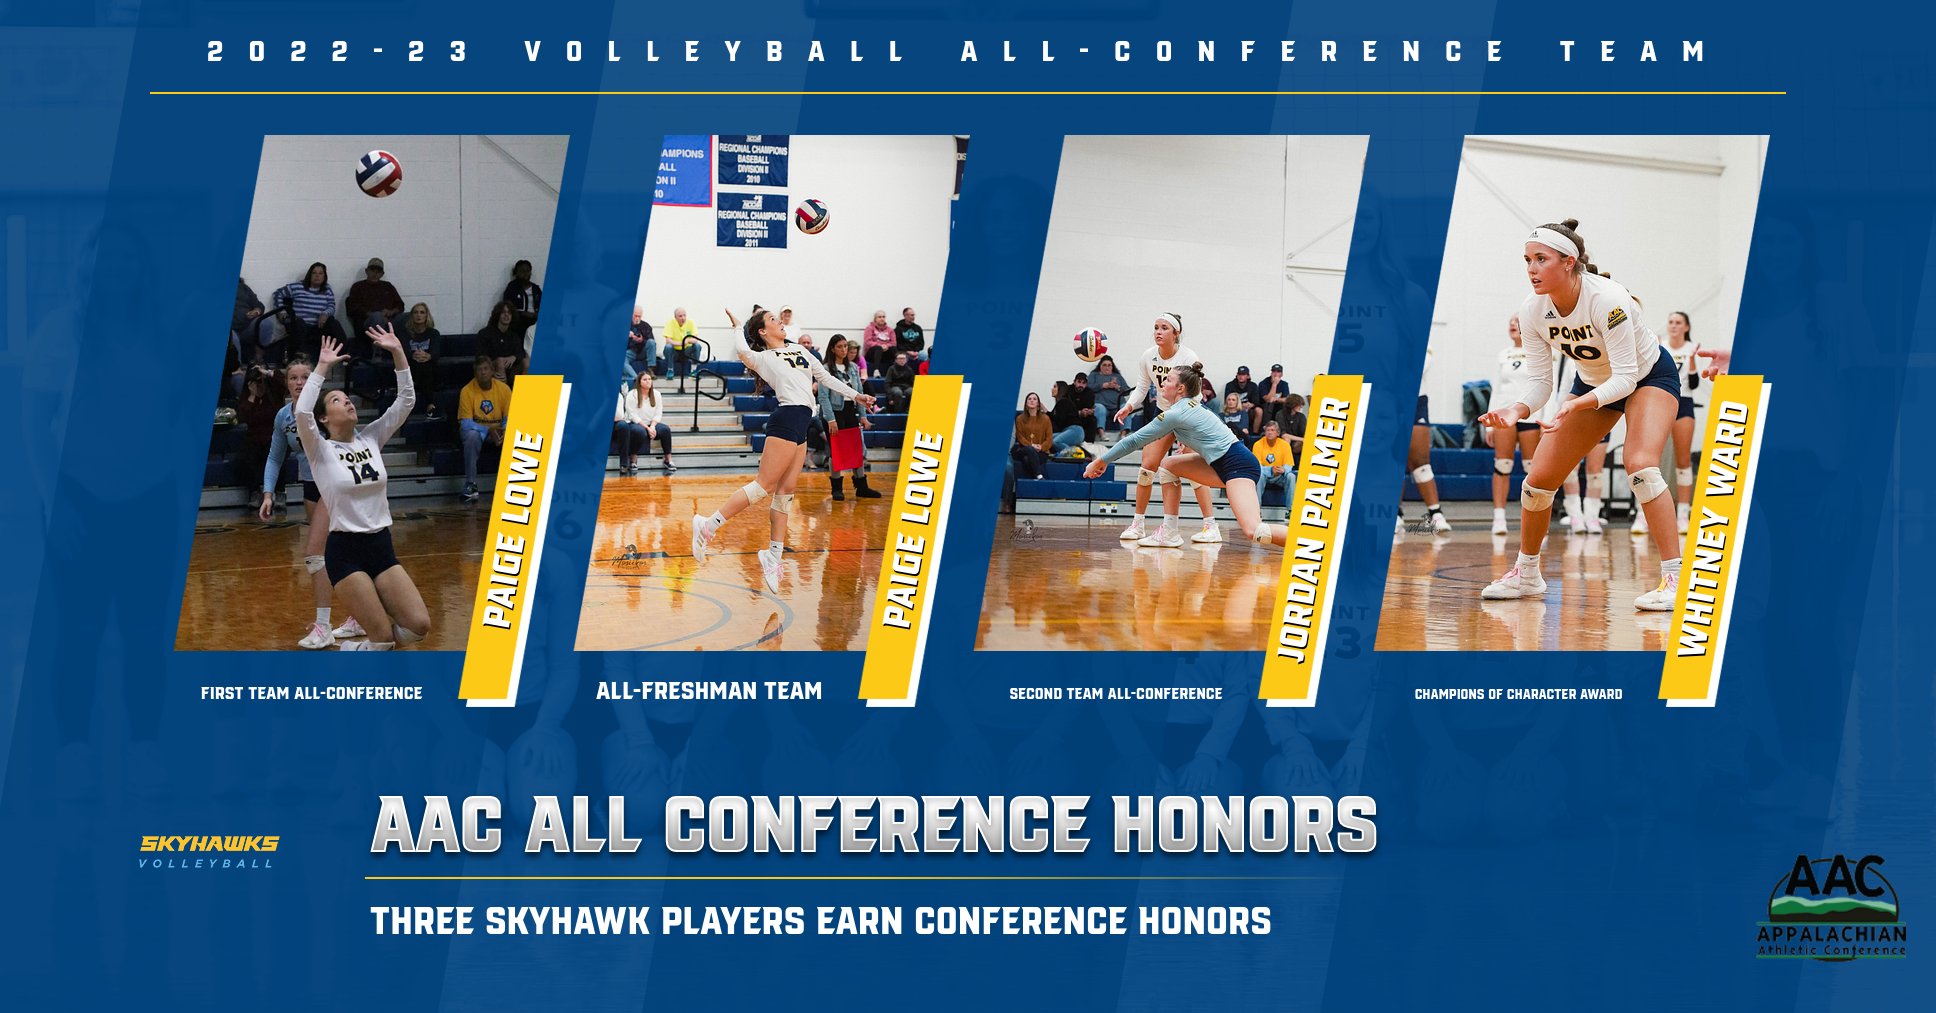 Multiple Point Volleyball Players earn AAC All-Conference Awards